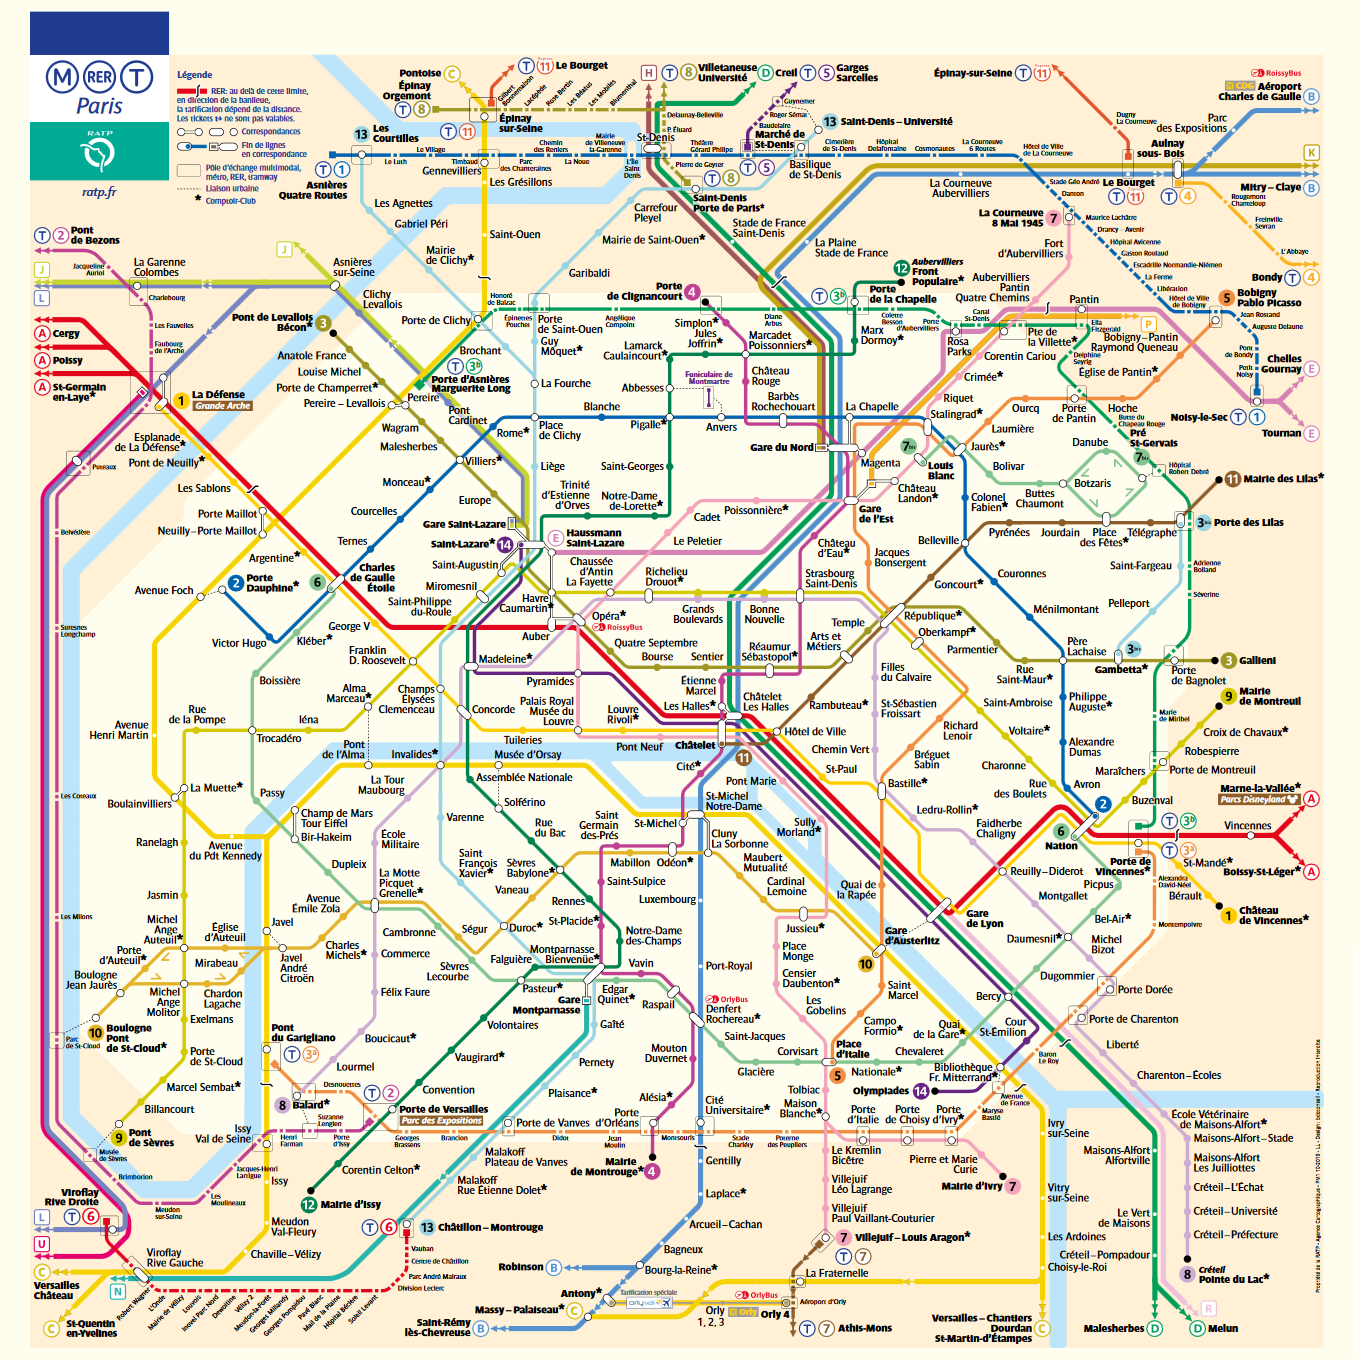 Map of the Metro